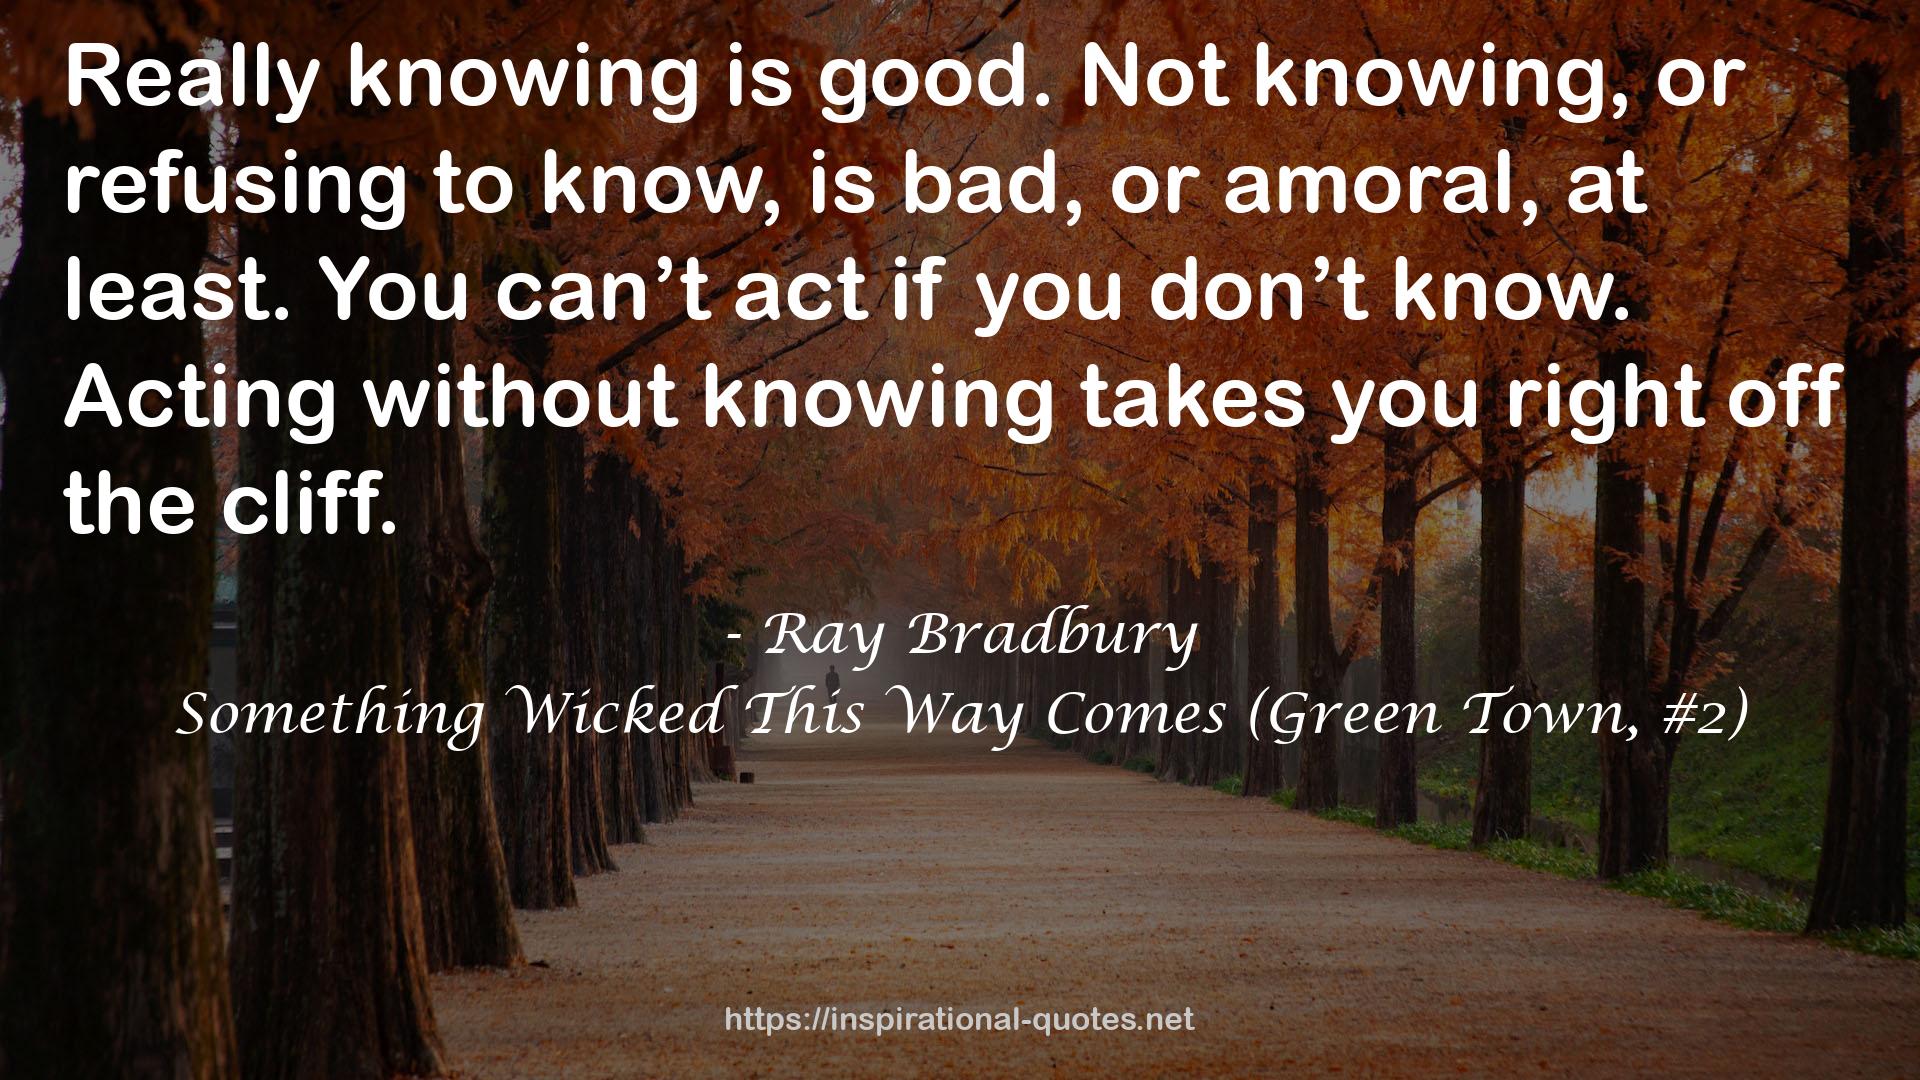 Something Wicked This Way Comes (Green Town, #2) QUOTES